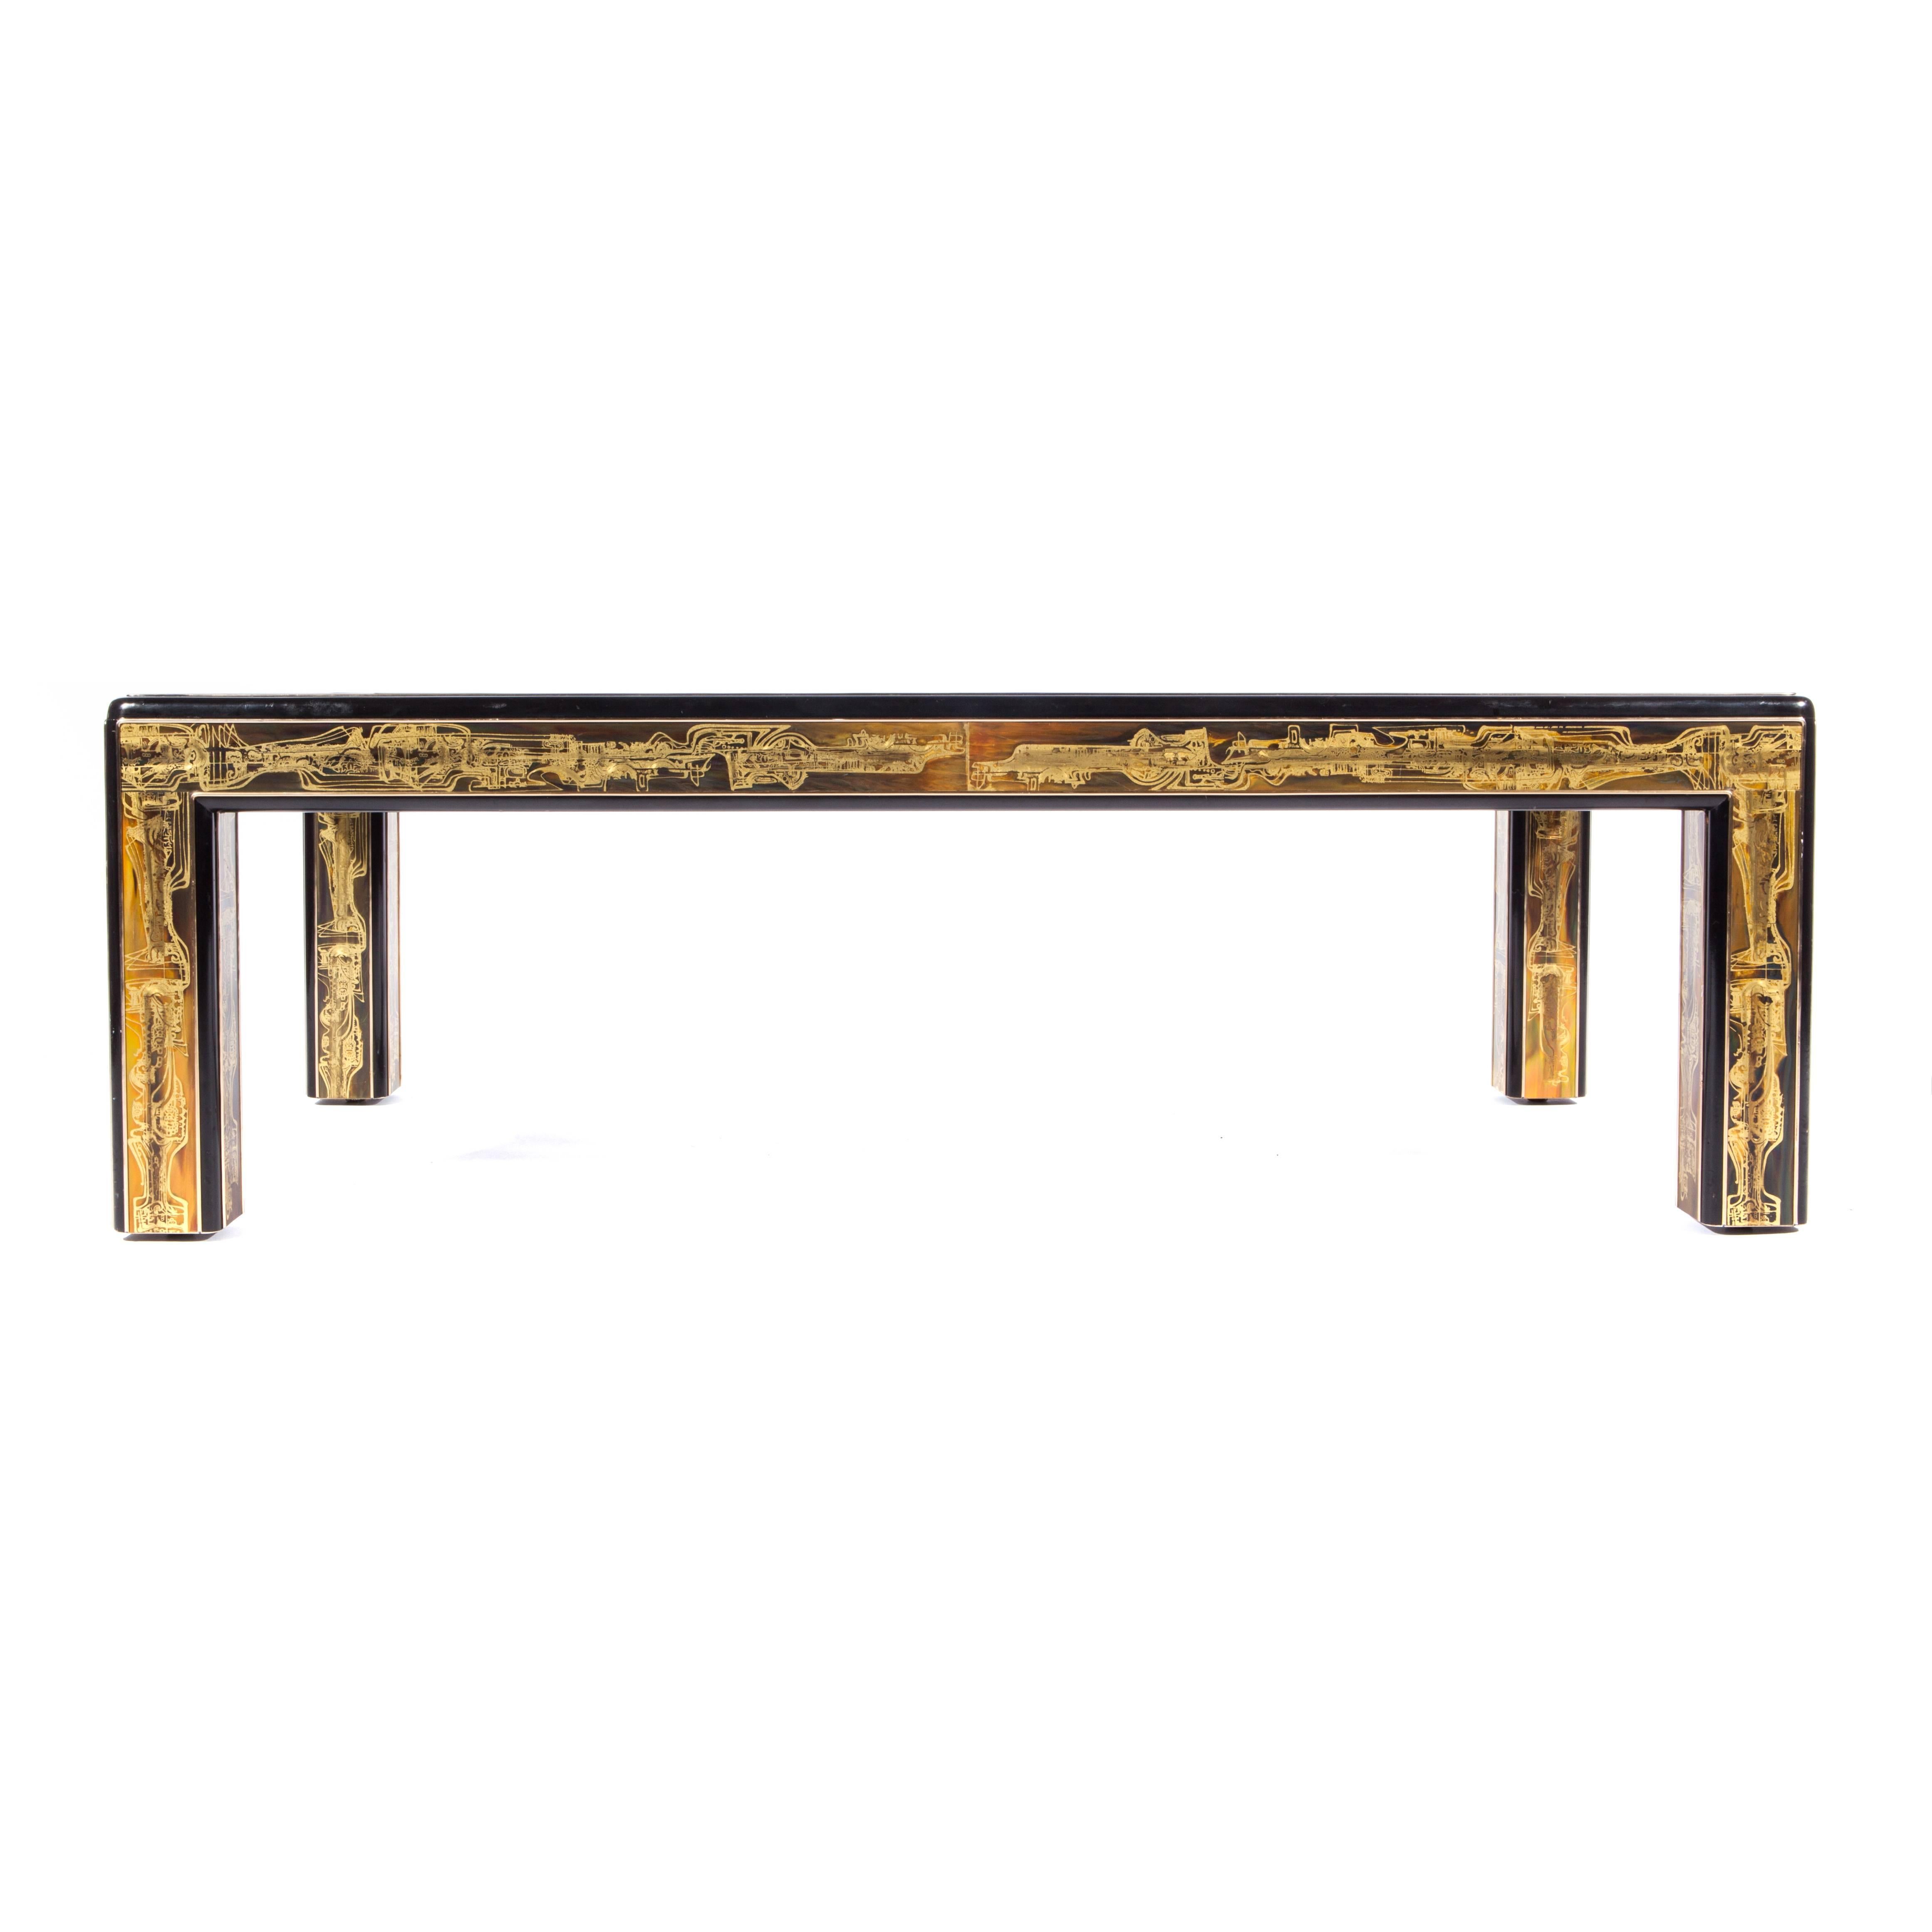 American Mastercraft Coffee Table in Acid-Etched Brass by Bernhard Rohne, Circa 1970s